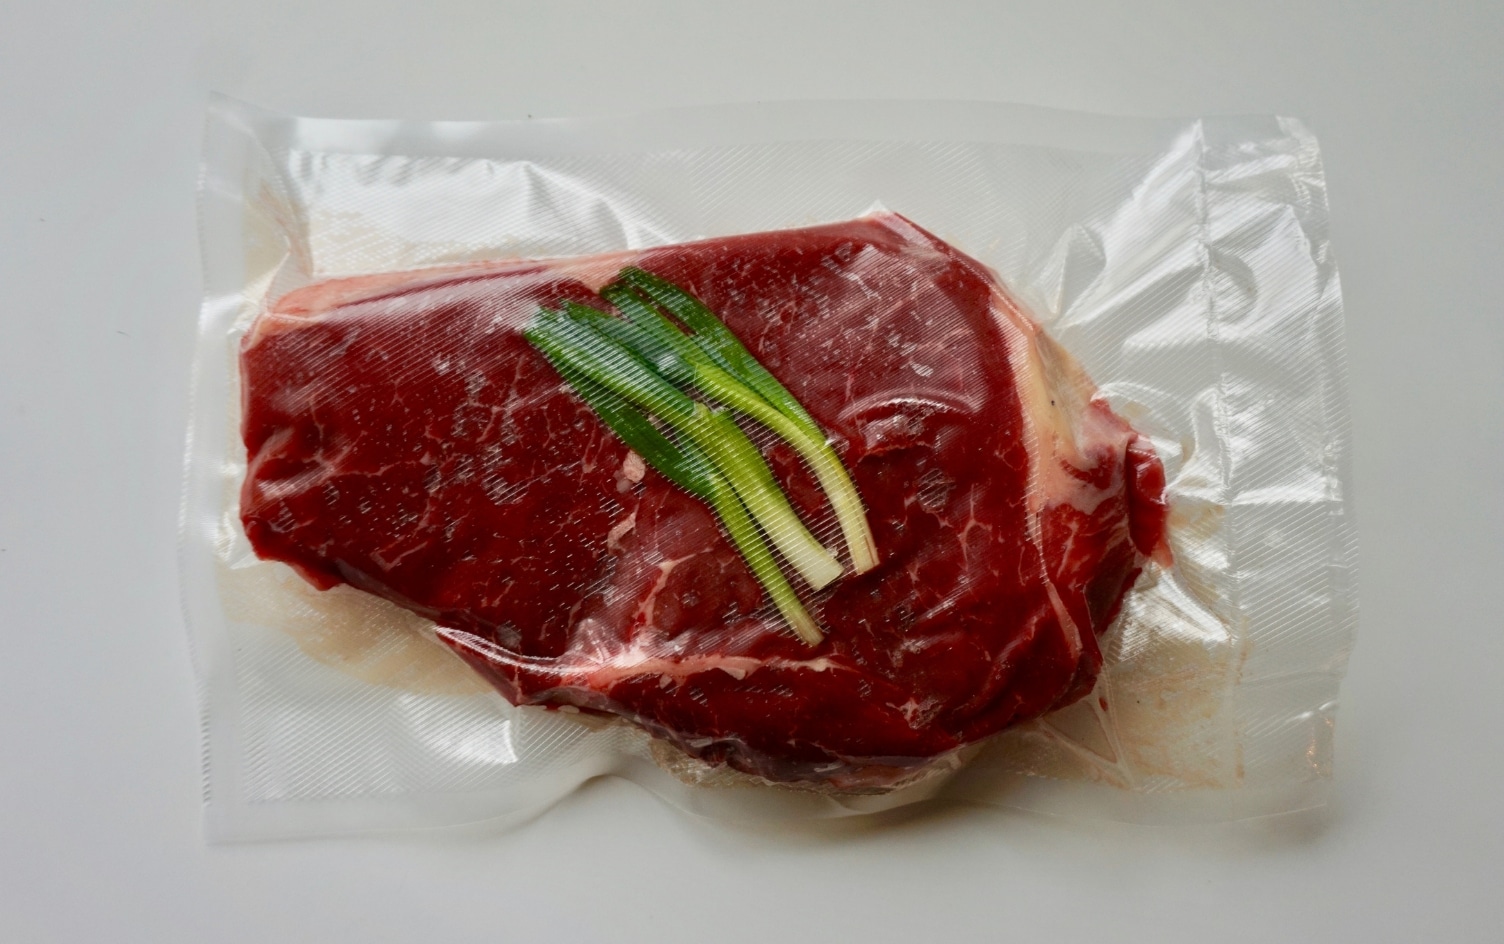 https://blog.myfitnesspal.com/wp-content/uploads/2019/05/A-Step-by-Step-Guide-to-Sous-Vide-Perfect-Meats-1.jpg